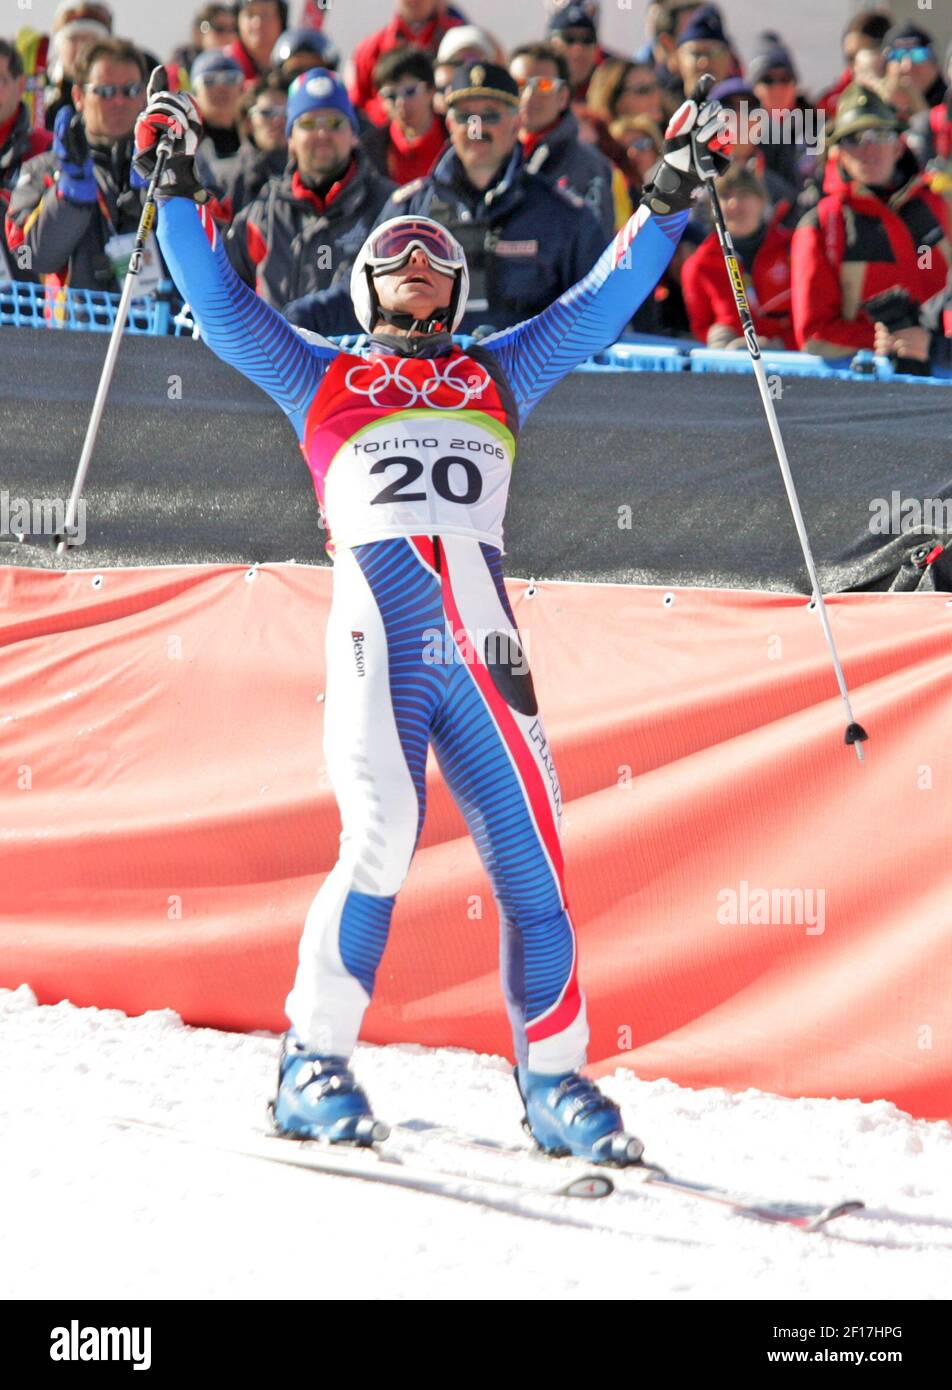 Joel Chenal of France reacts after his silver medal run in the men's giant Slalom at the Turin 2006 Winter Olympic Games in Sestriere Colle, Italy Monday February 20, 2006. (Ron Jenkins./ Fort Worth Star-Telegram/ KRT) Stock Photo